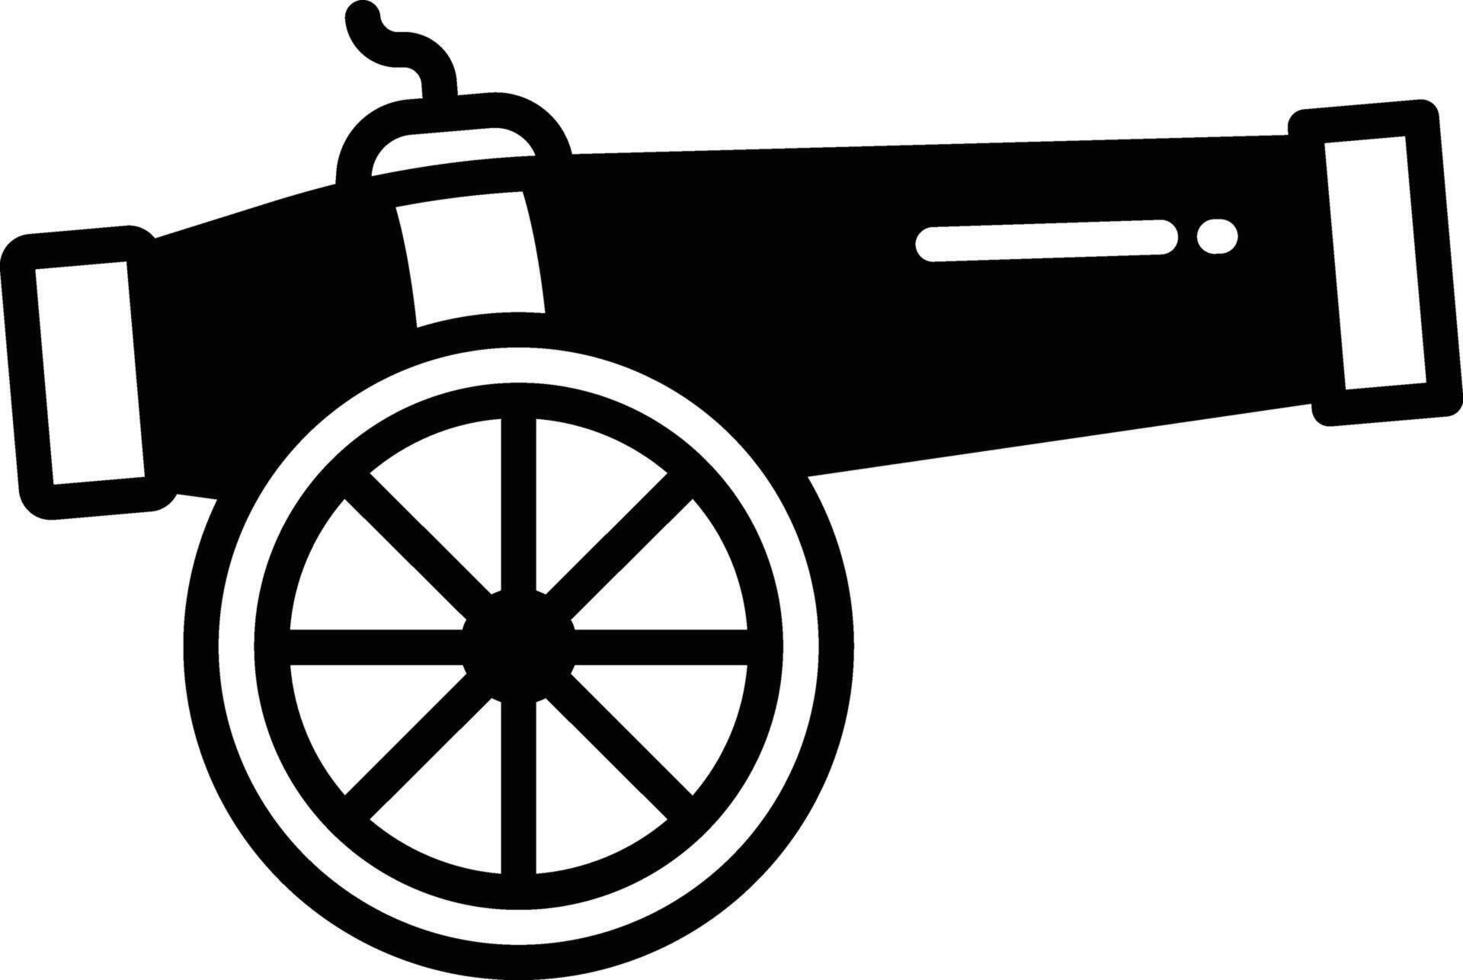 Cannon glyph and line vector illustration